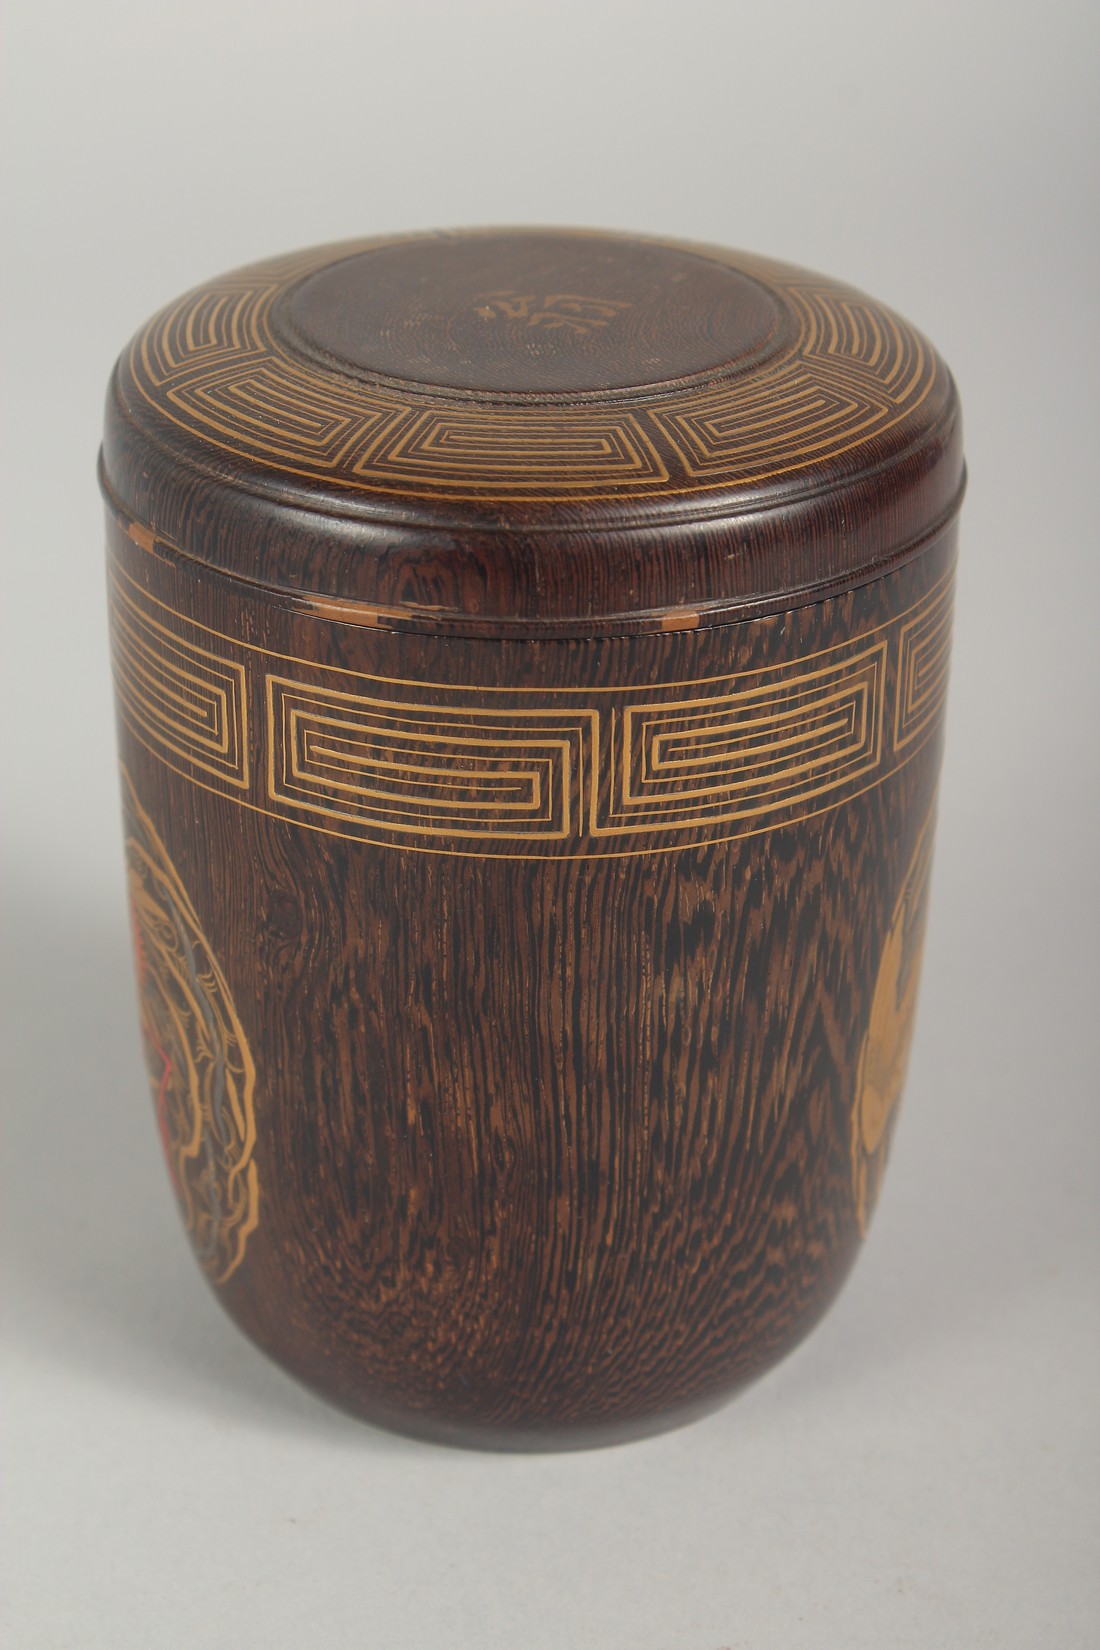 A FINE JAPANESE TURNED WOOD NATSUME / TEA CADDY, with a band of gilded key decoration to the lid and - Image 4 of 9